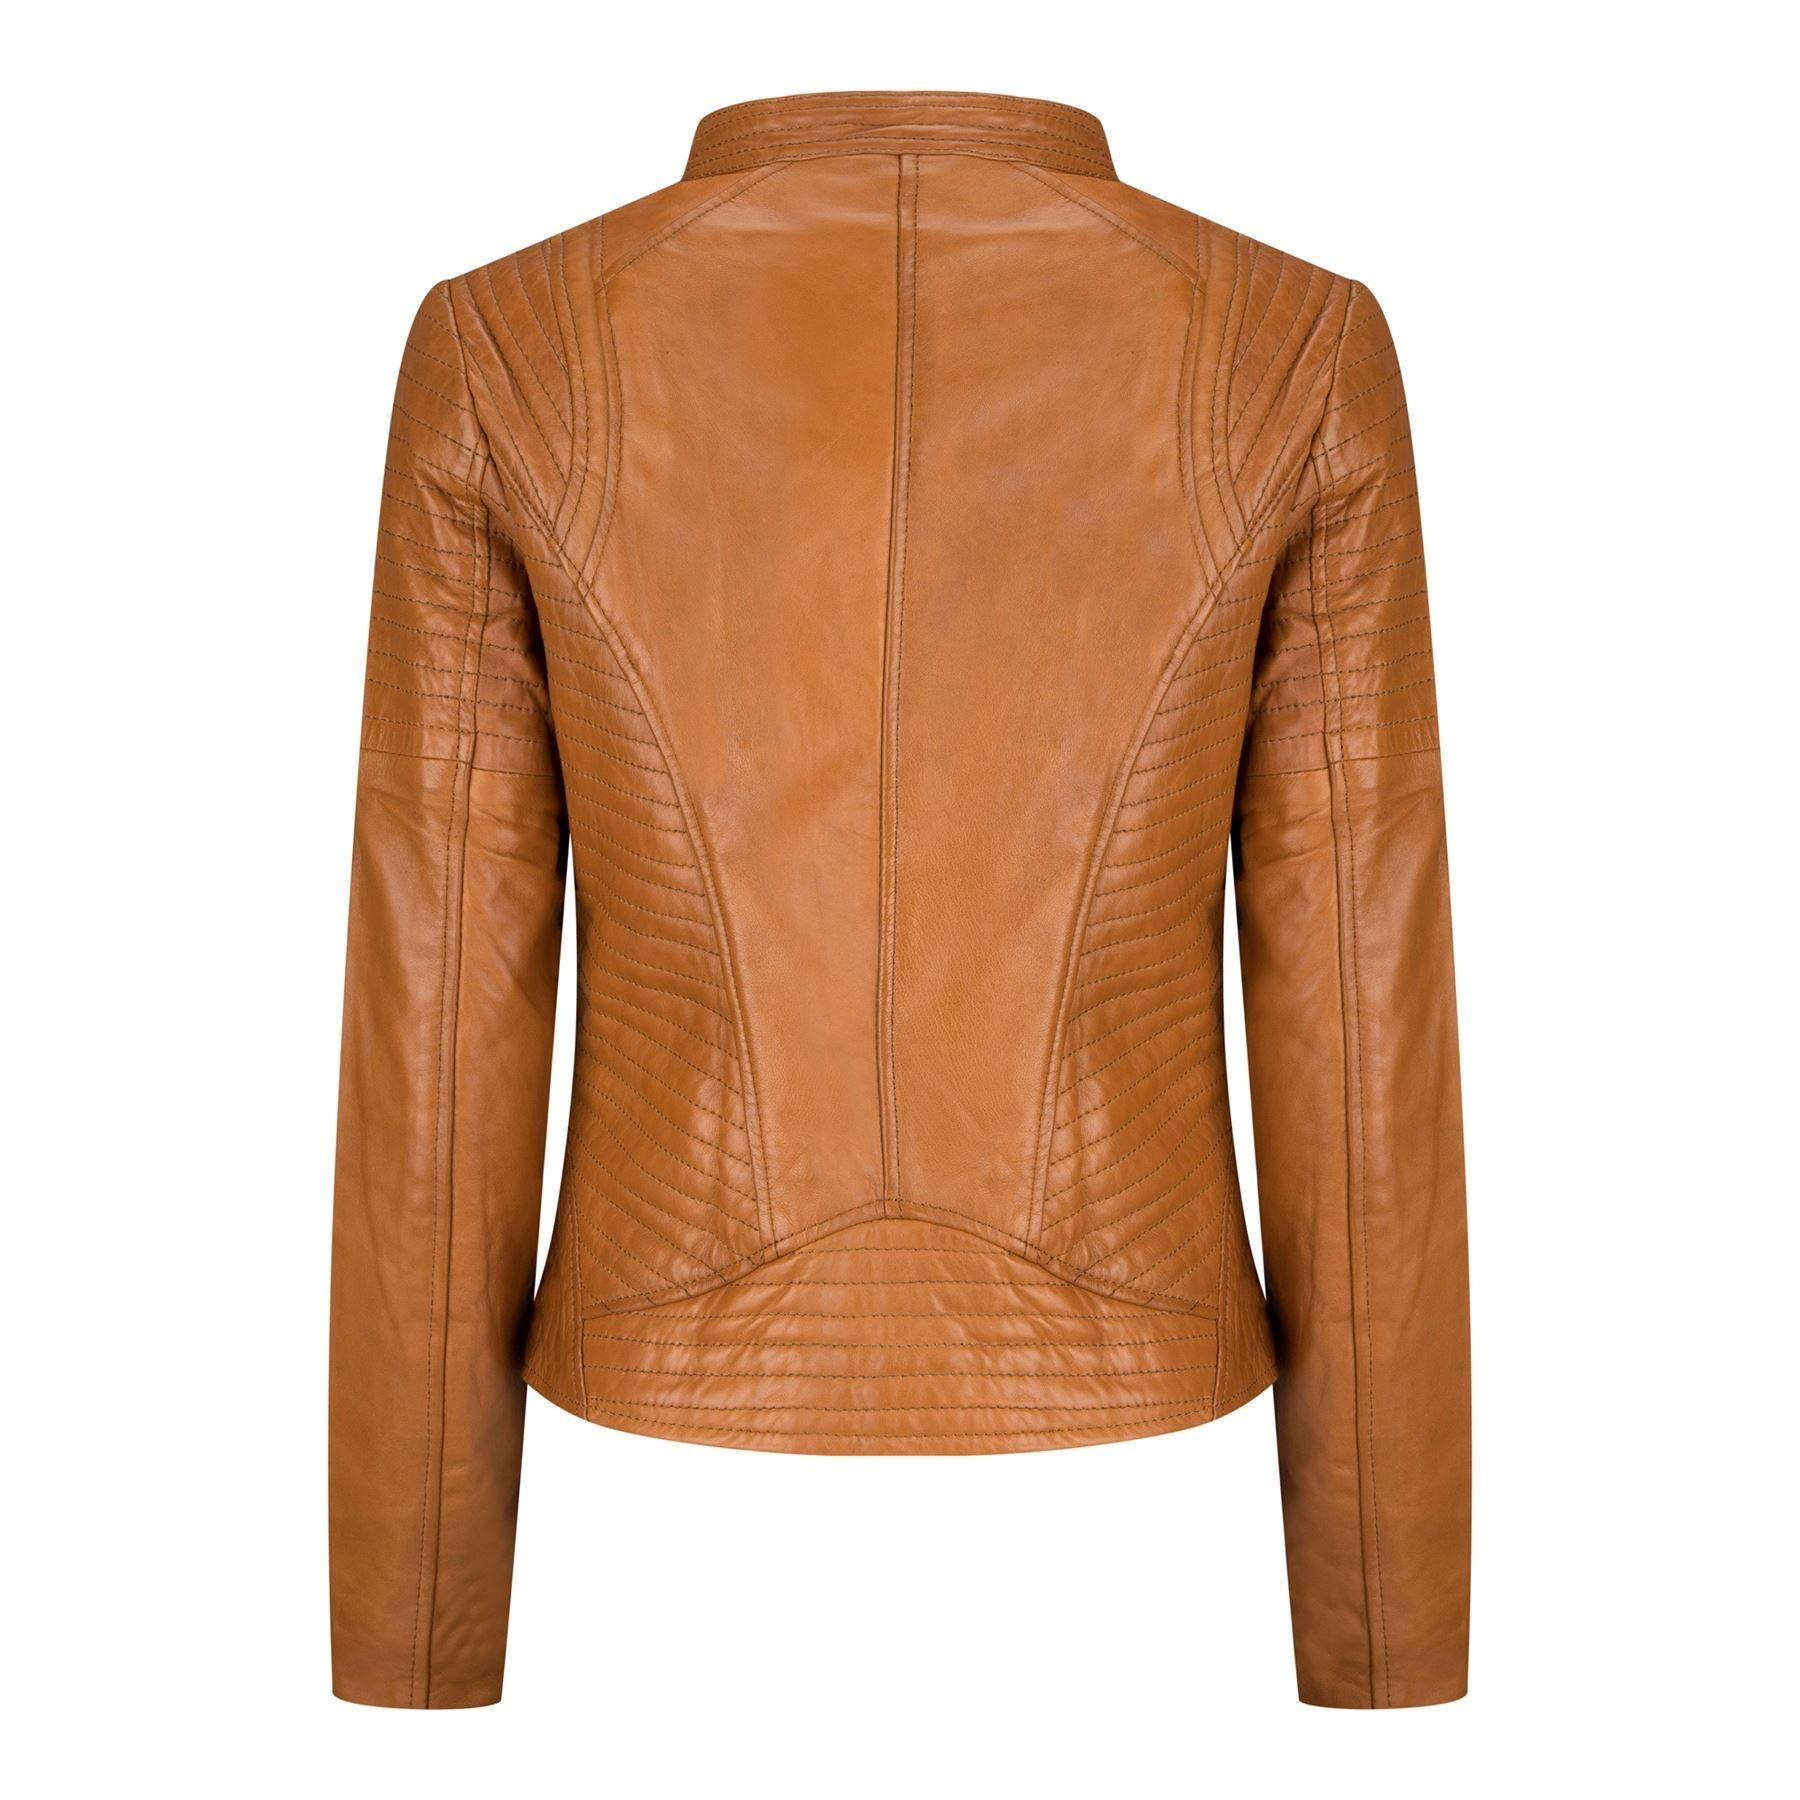 Ladies Real Leather Jacket Short Fitted Bikers Style Vintage Tan Brown Rock - Knighthood Store